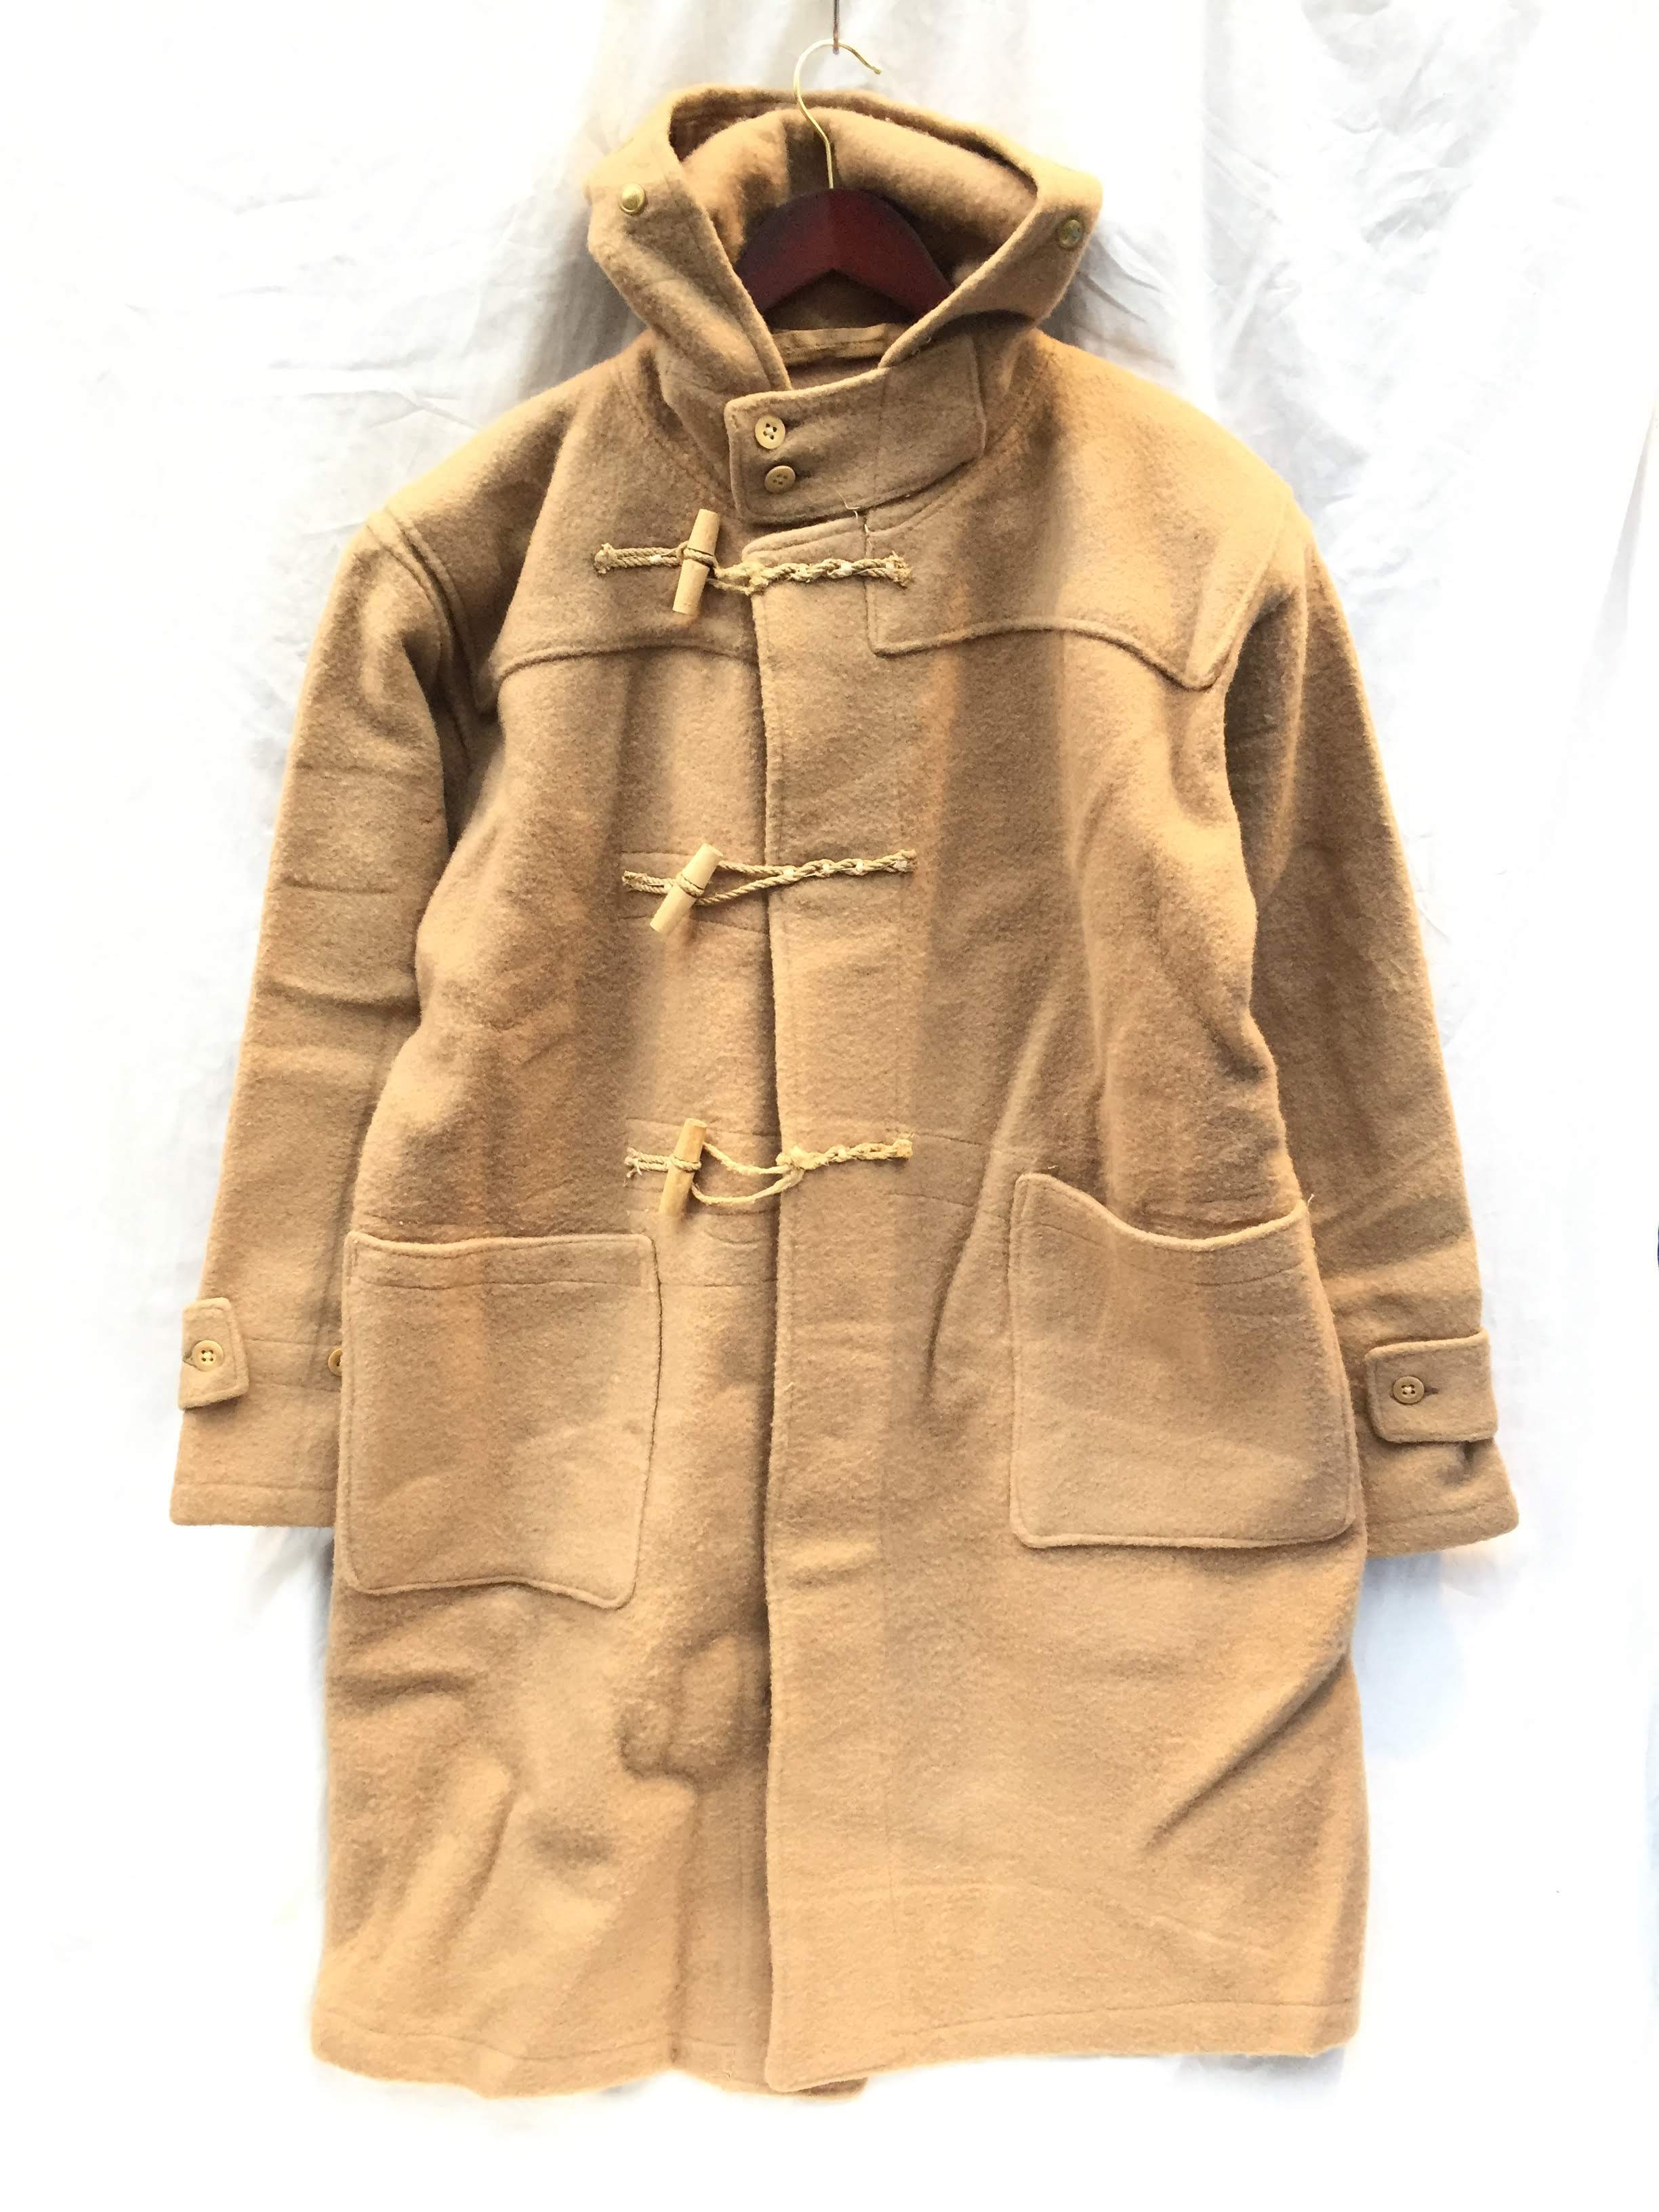 1943 Dated 40's Vintage Royal Navy Duffle Coat MONTY Good Condition